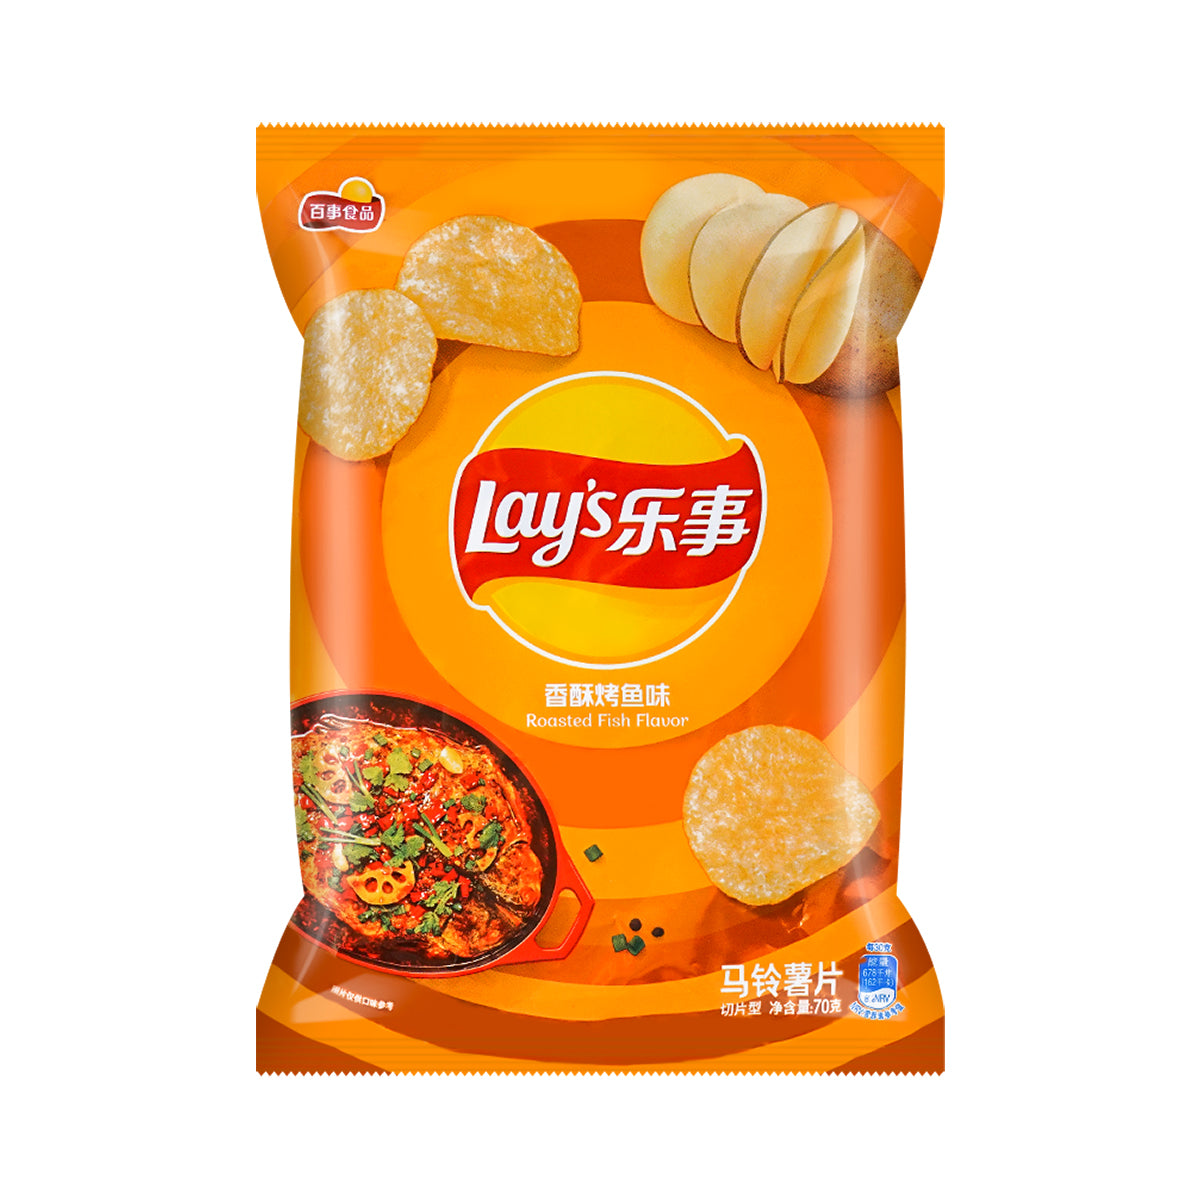 lay's potato chips crispy grilled fish flavor - 70g